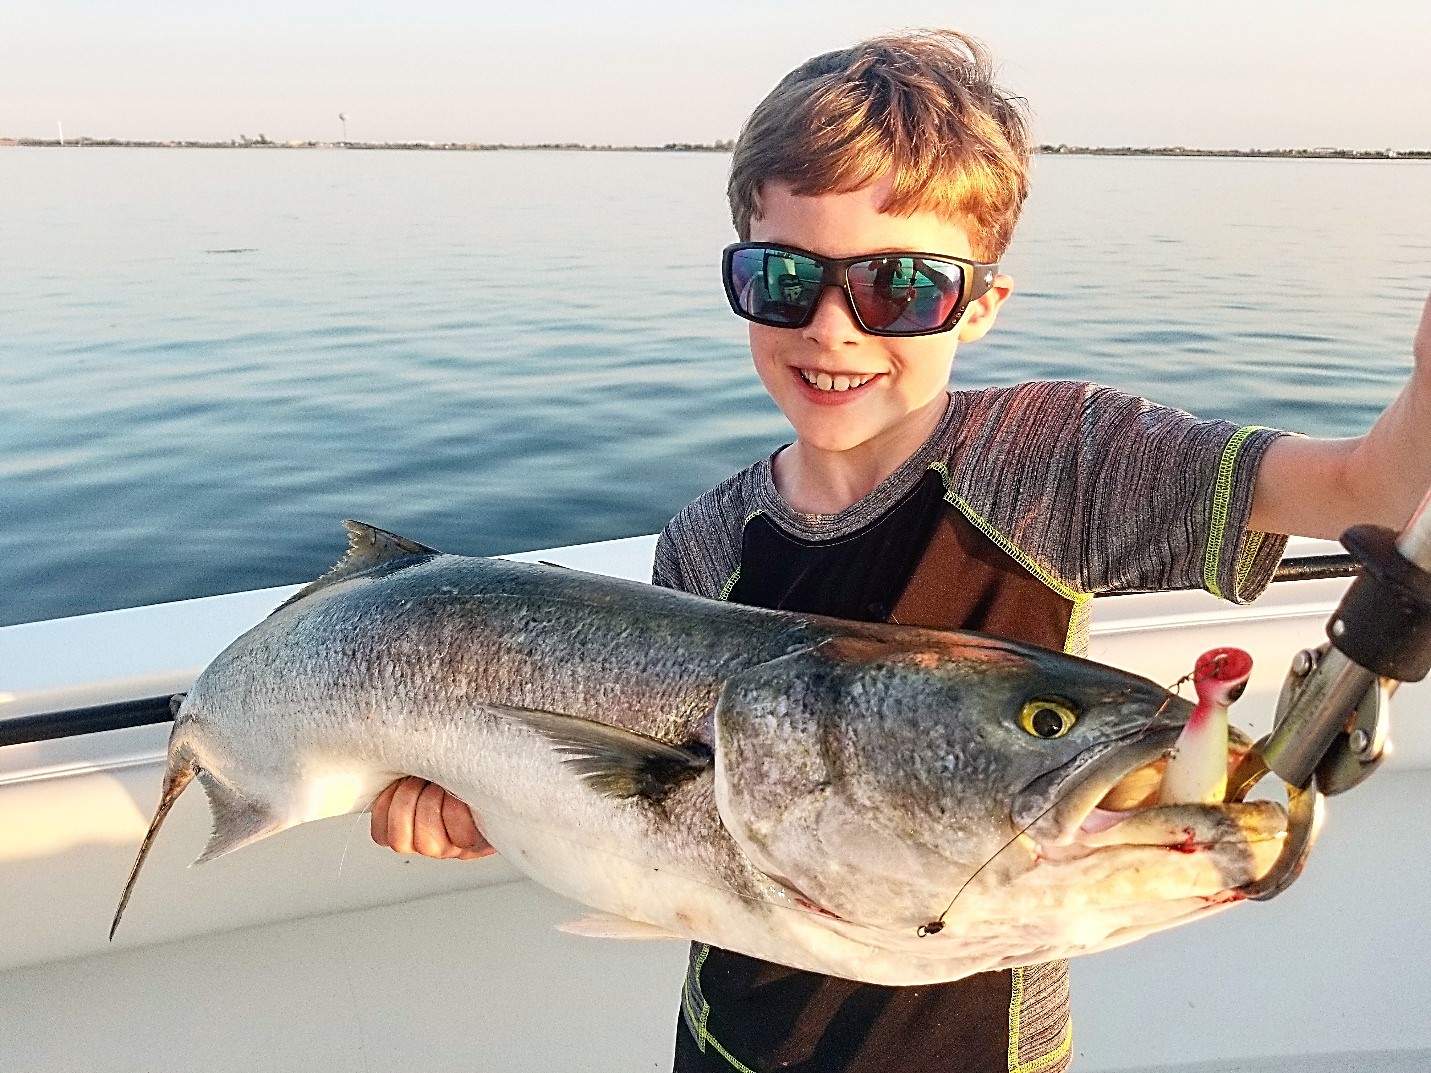 Oliver with bluefish